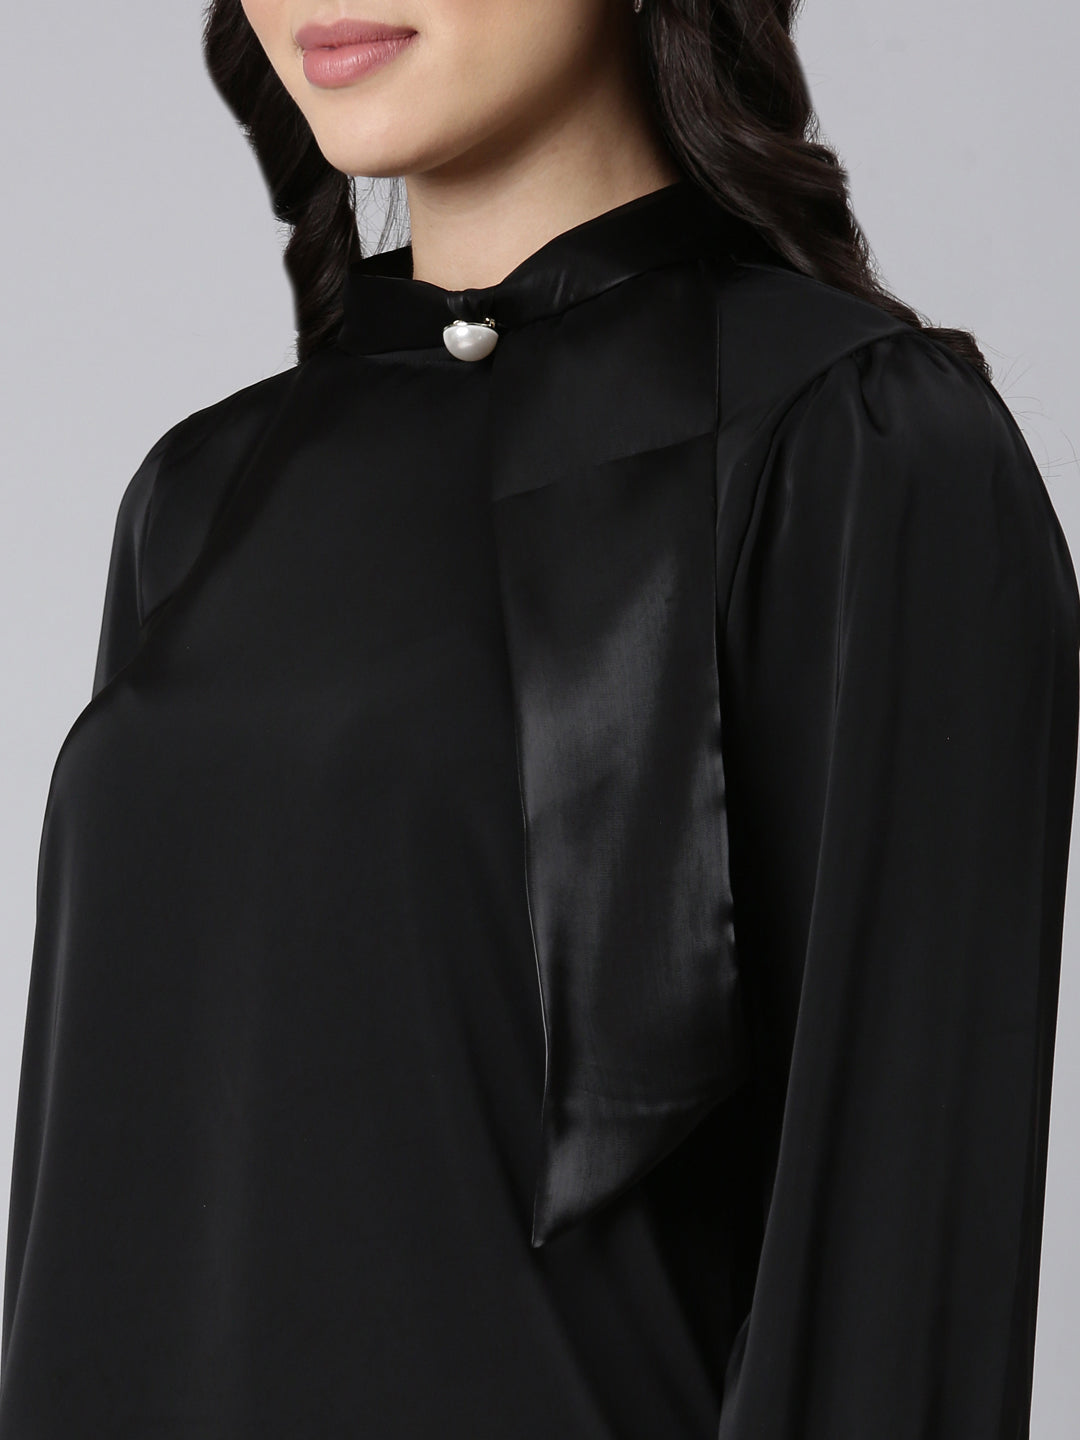 Women Solid Shirt Style Black Top